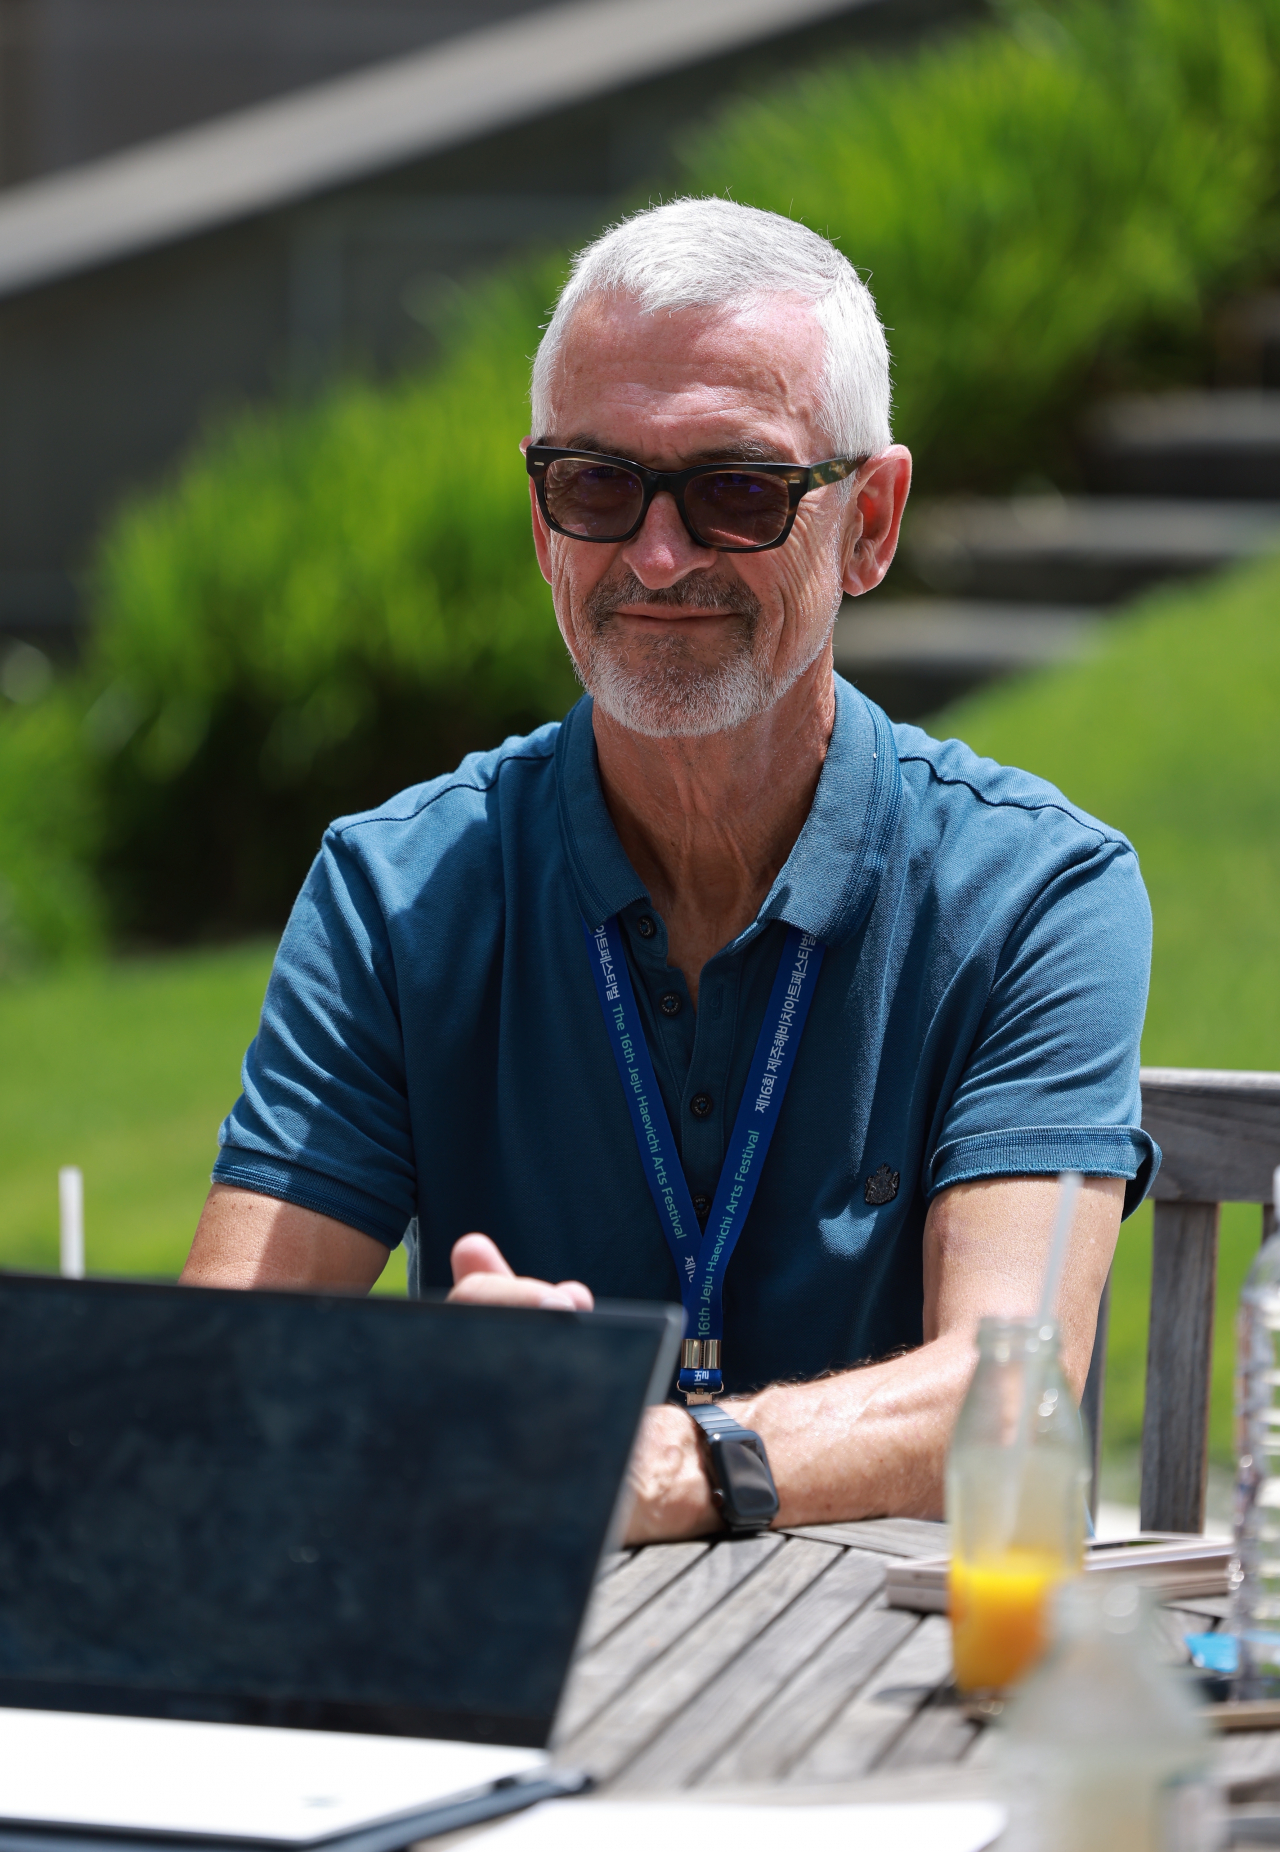 William Burdett-Coutts sits for an interview at Jeju Haevichi Hotel and Resorts during the Jeju Haevichi Arts Festival on Jeju Island on Tuesday. (Kocaca)